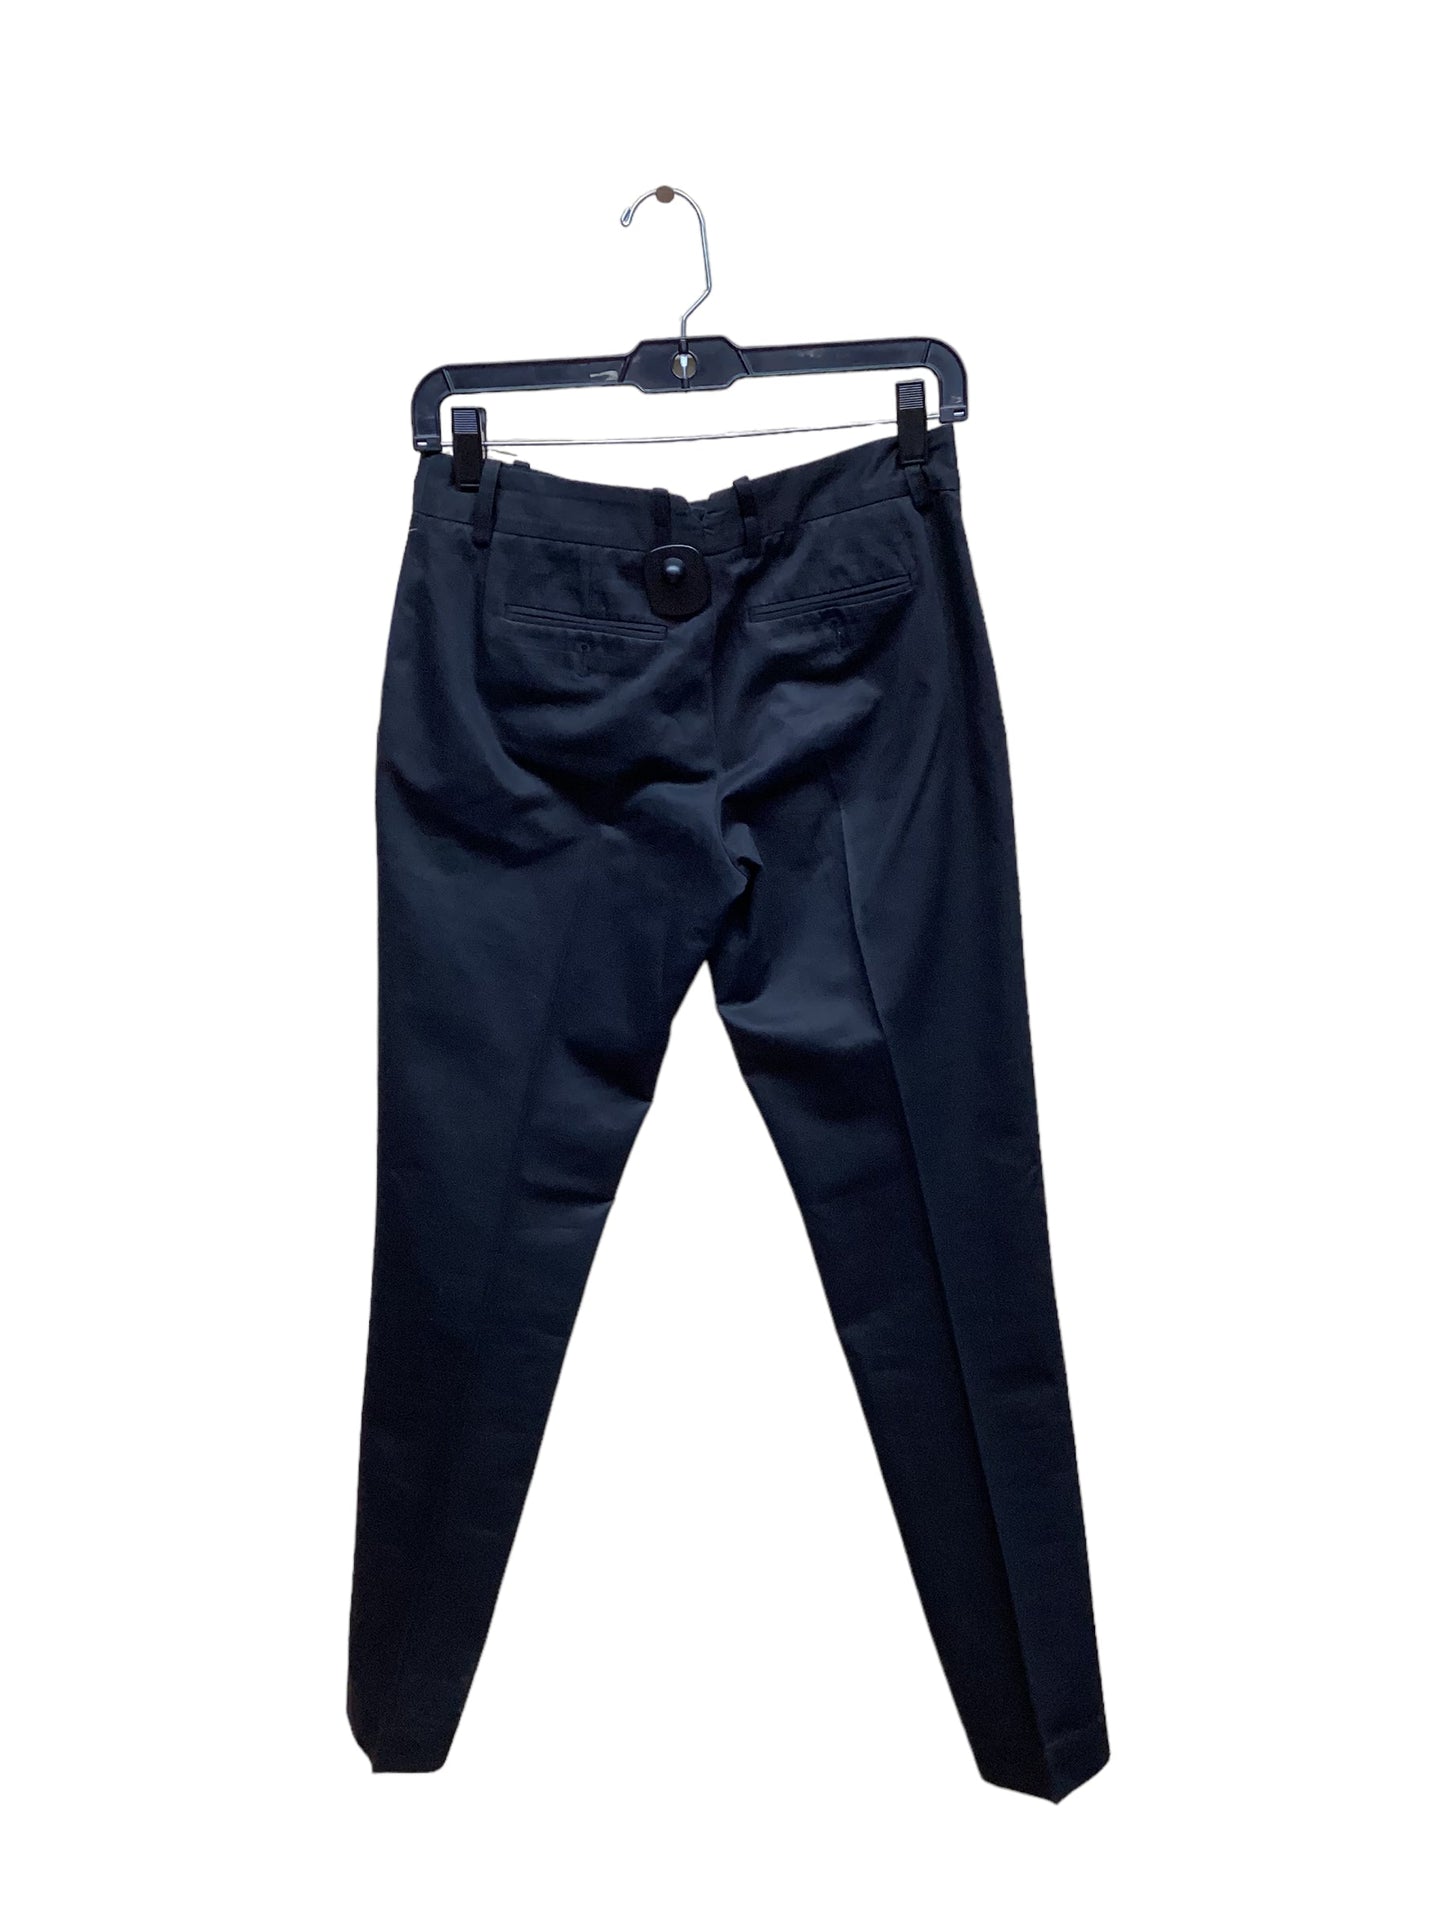 Pants Ankle By Lacoste  Size: 2